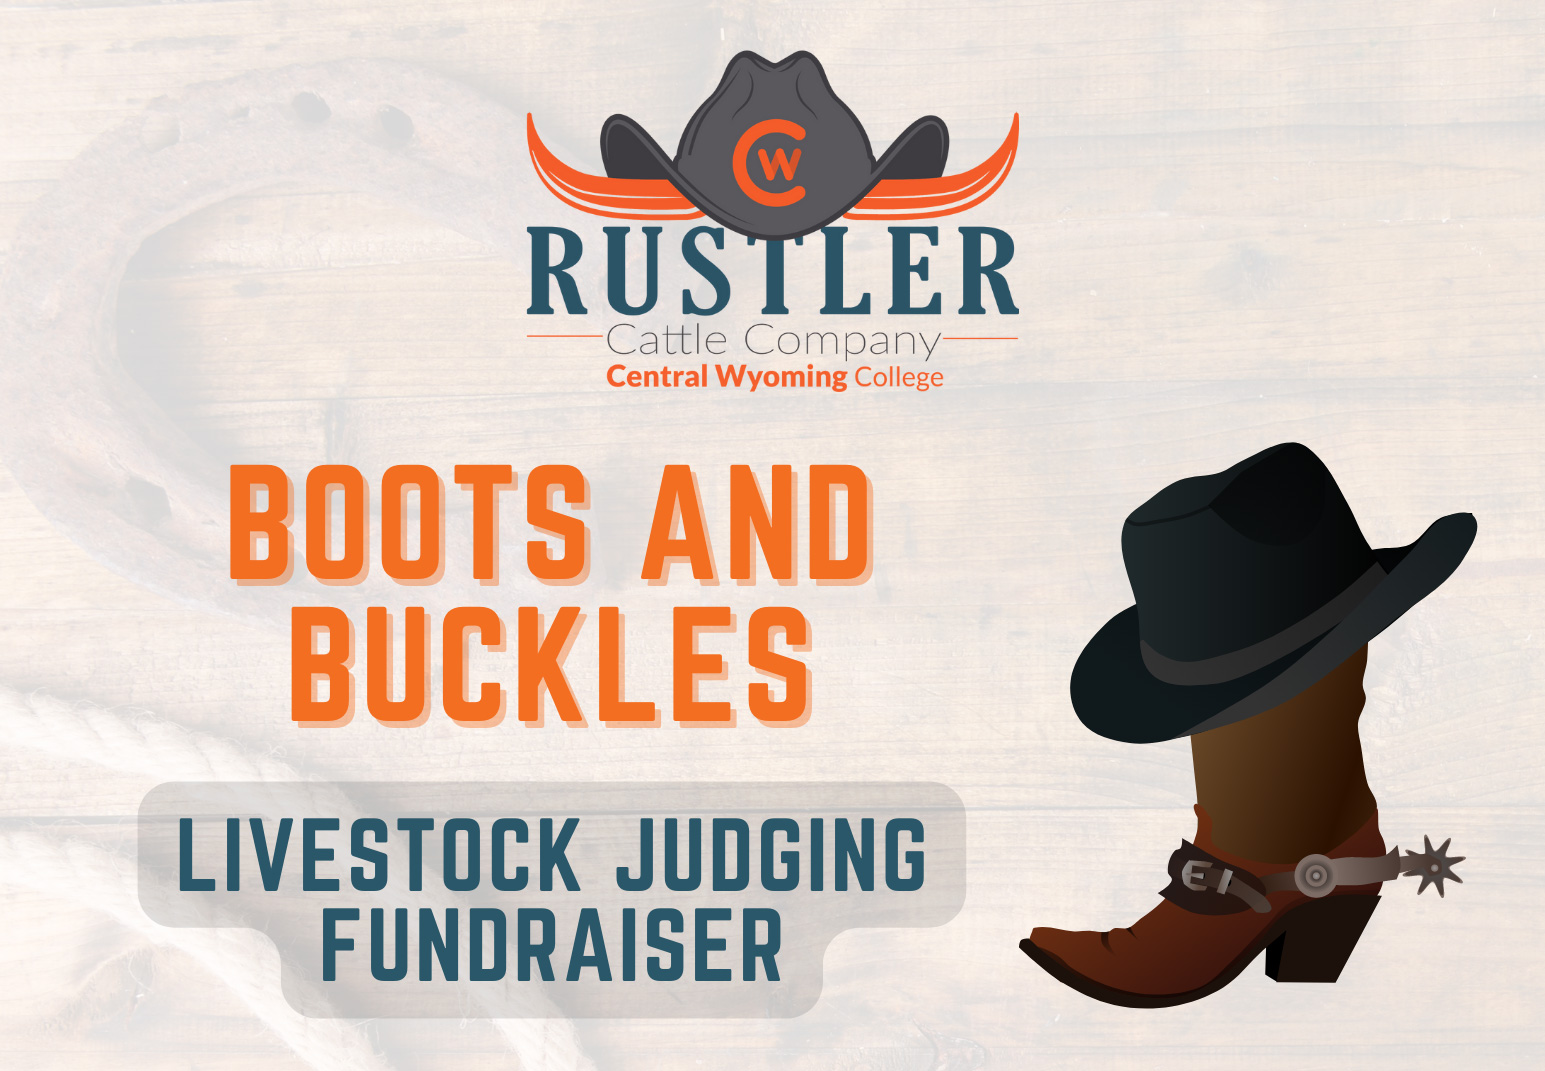 Graphic promoting the Boots and Buckles Event